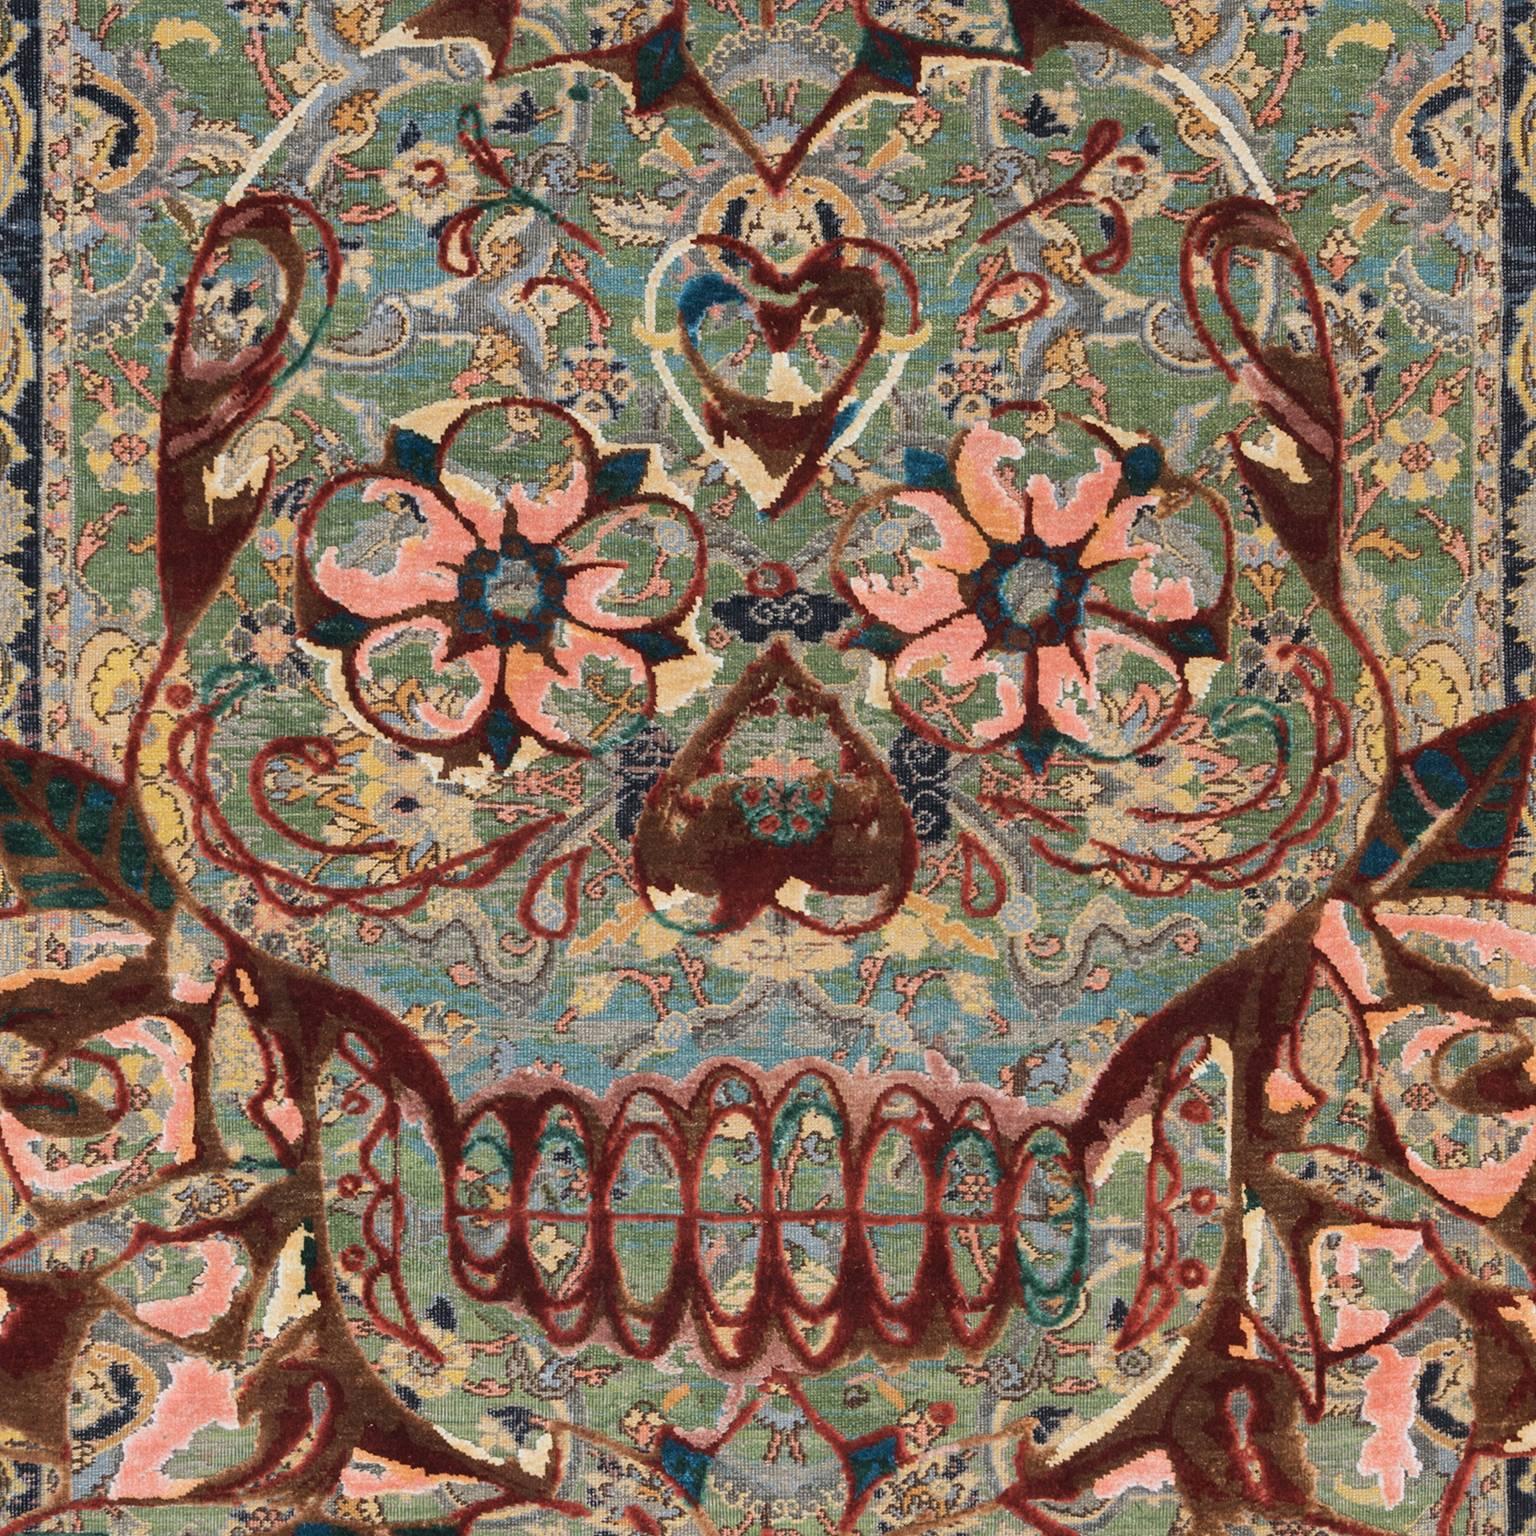 Knots rugs presents the new '17th century modern King Umberto Skull'. Produced in Jaipur in 11/11 Persian knot quality from oxidised wool and silk.
This piece is number 1/10 of this special Limited Edition collection produced by Knots Rugs. The